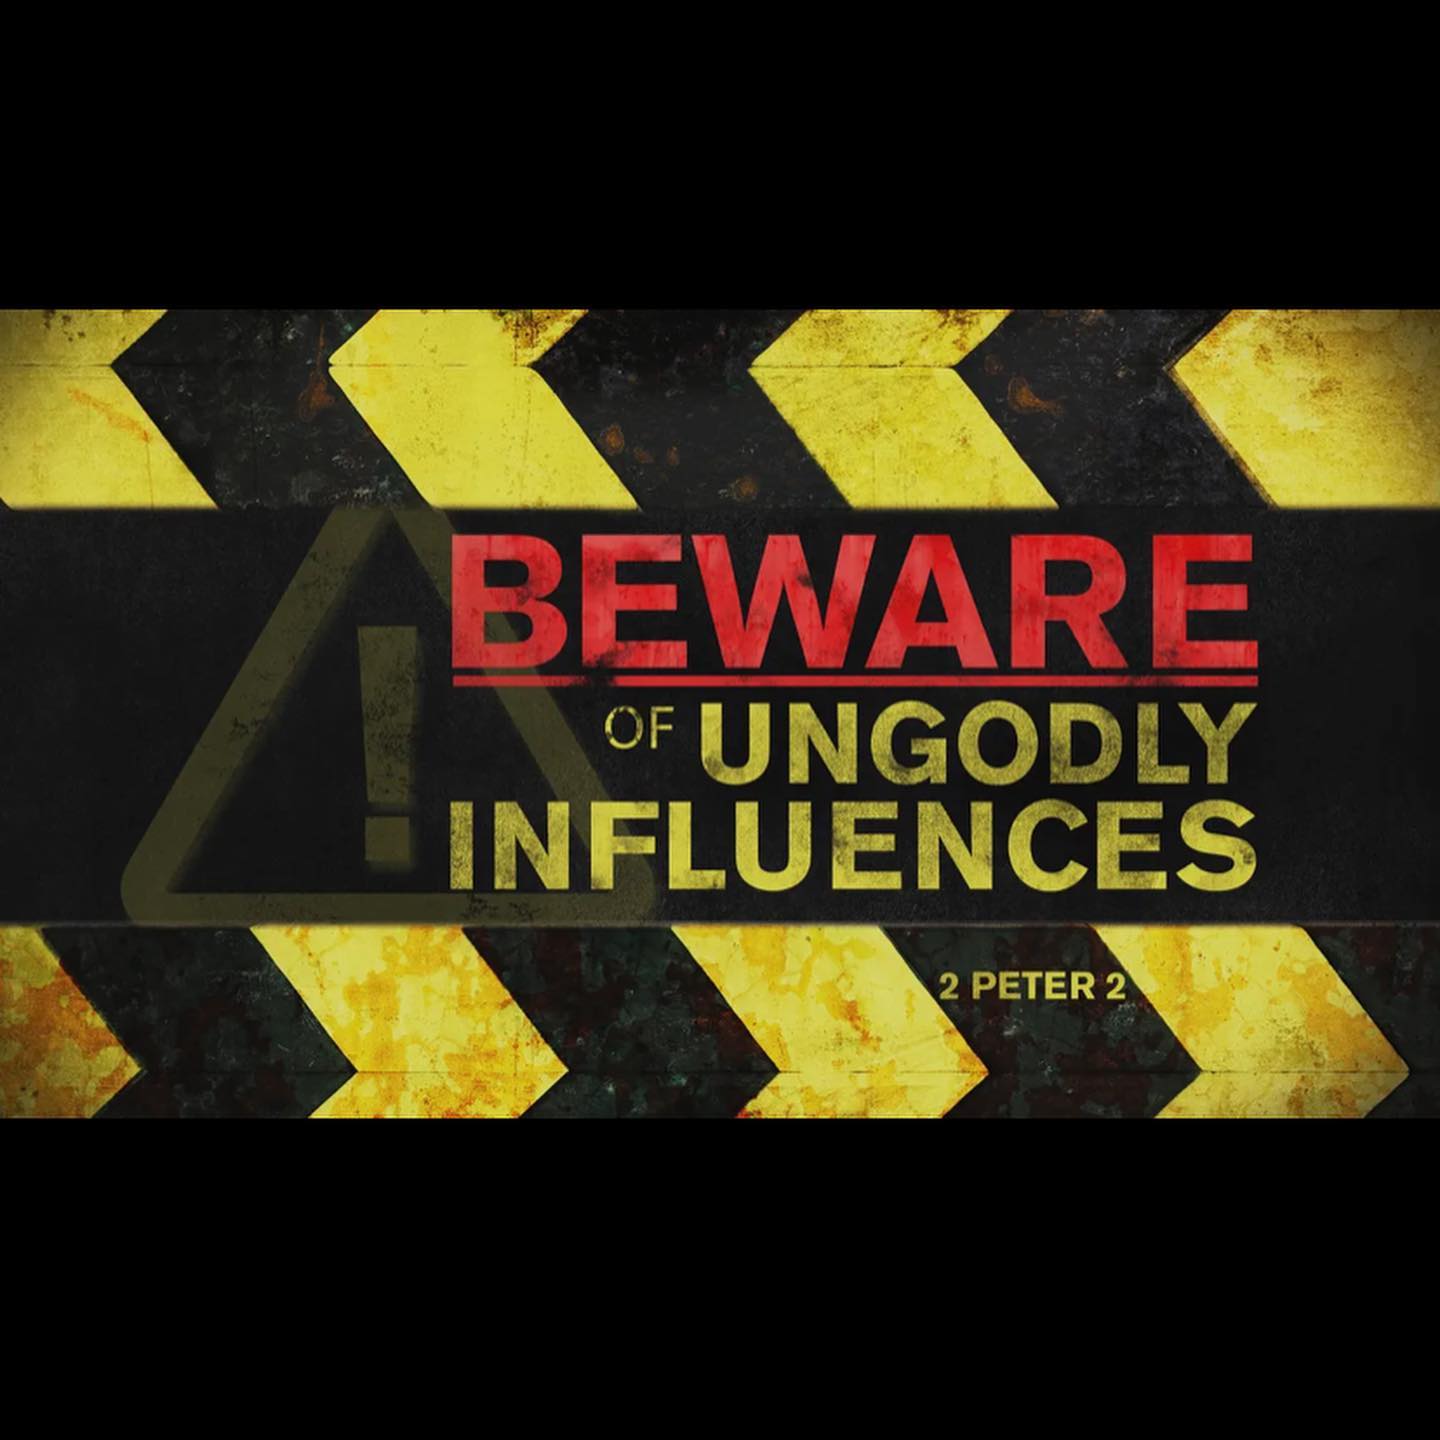 Peter gives three warning signs for identifying false teachers:1. Immorality2. Greed 3. Lying Some people would have us believe God will spare all because of His love. But it’s foolish to think God will cancel judgement against those who rebel against Him. Join us Sunday 10AM @fallbrookvineyardchurch as we continue through 2 Peter. Dave Baxter will help teach about the dangers to Christians and how to identify false teachers. Serious times call for serious truth. #fasleteachers#warningsigns#godsjudgement#absolutetruth#salvation#growinginfaith#faithinaction#standingonthepromisesofgod#holiness#baptism#immersion#aliveinchrist#christisenough#revival#repentance#wordofgod#worship#prayer #praise#praisethelord#community #support #love#familyofgod #outdoorchurch #organicchurch #outlawchurch #dogfriendlychurch#dogchurch